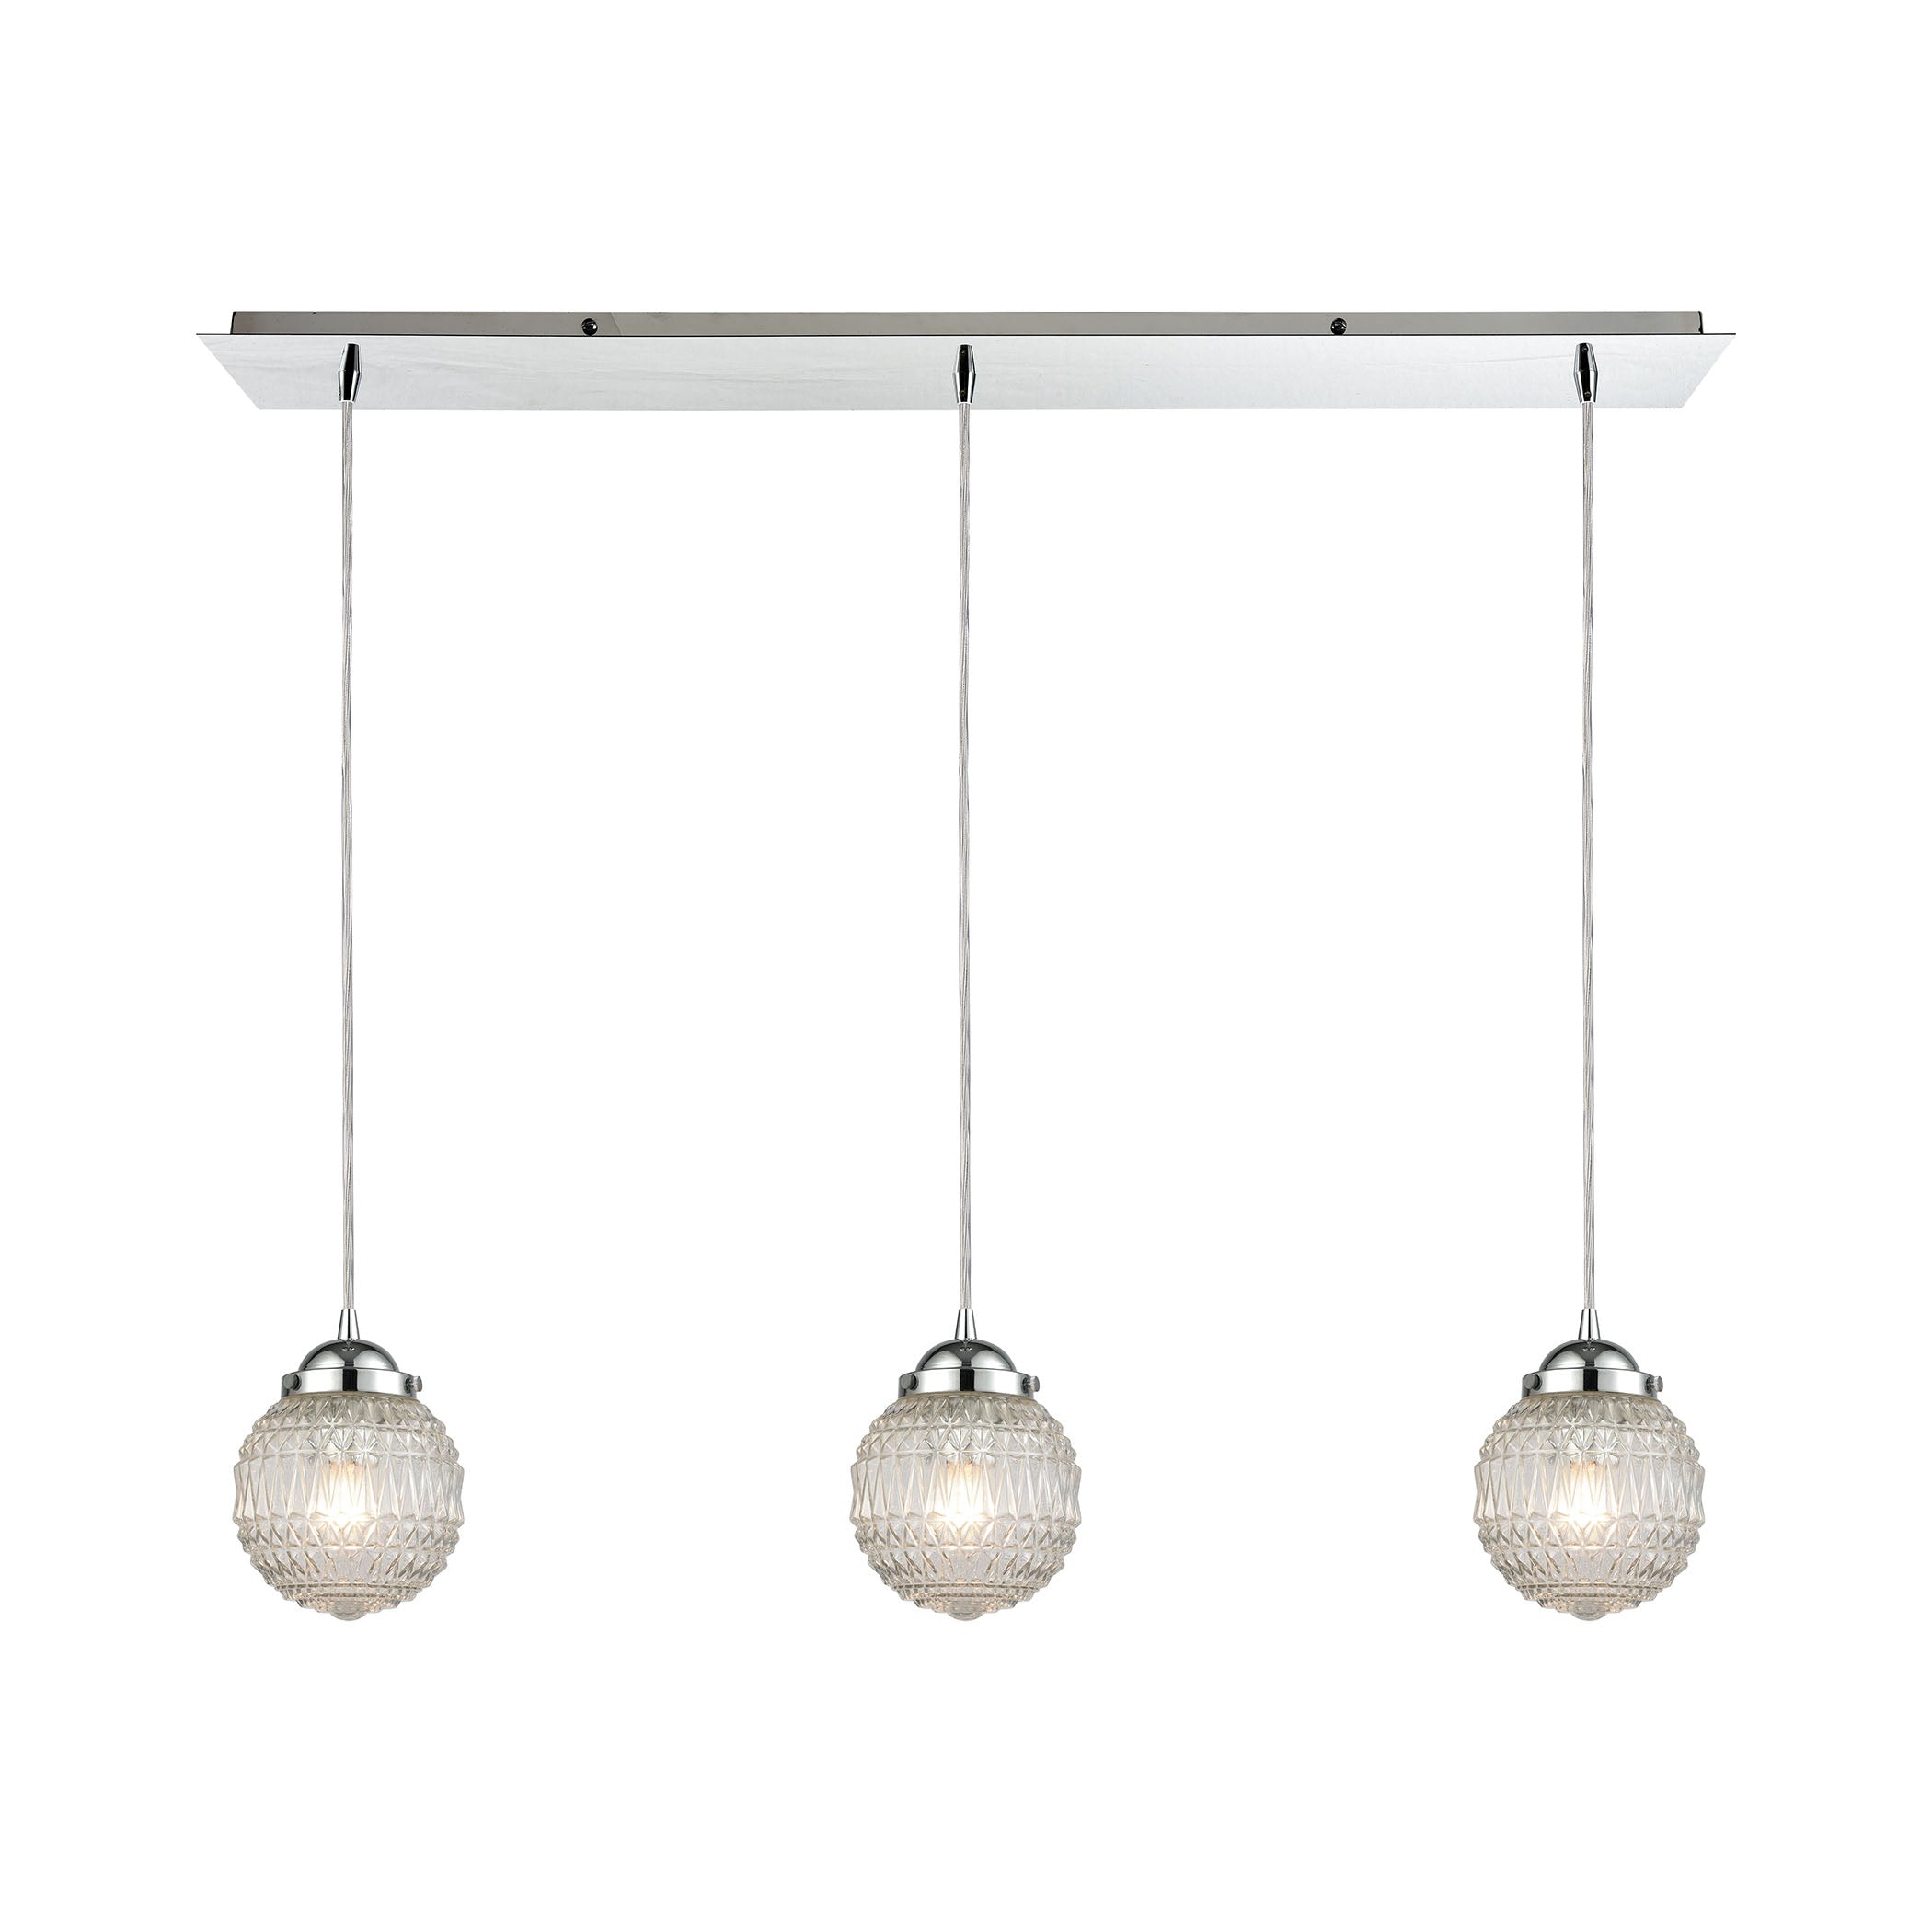 ELK Lighting 56591/3LP Victoriana 3-Light Linear Mini Pendant Fixture in Polished Chrome with Clear Patterned Glass